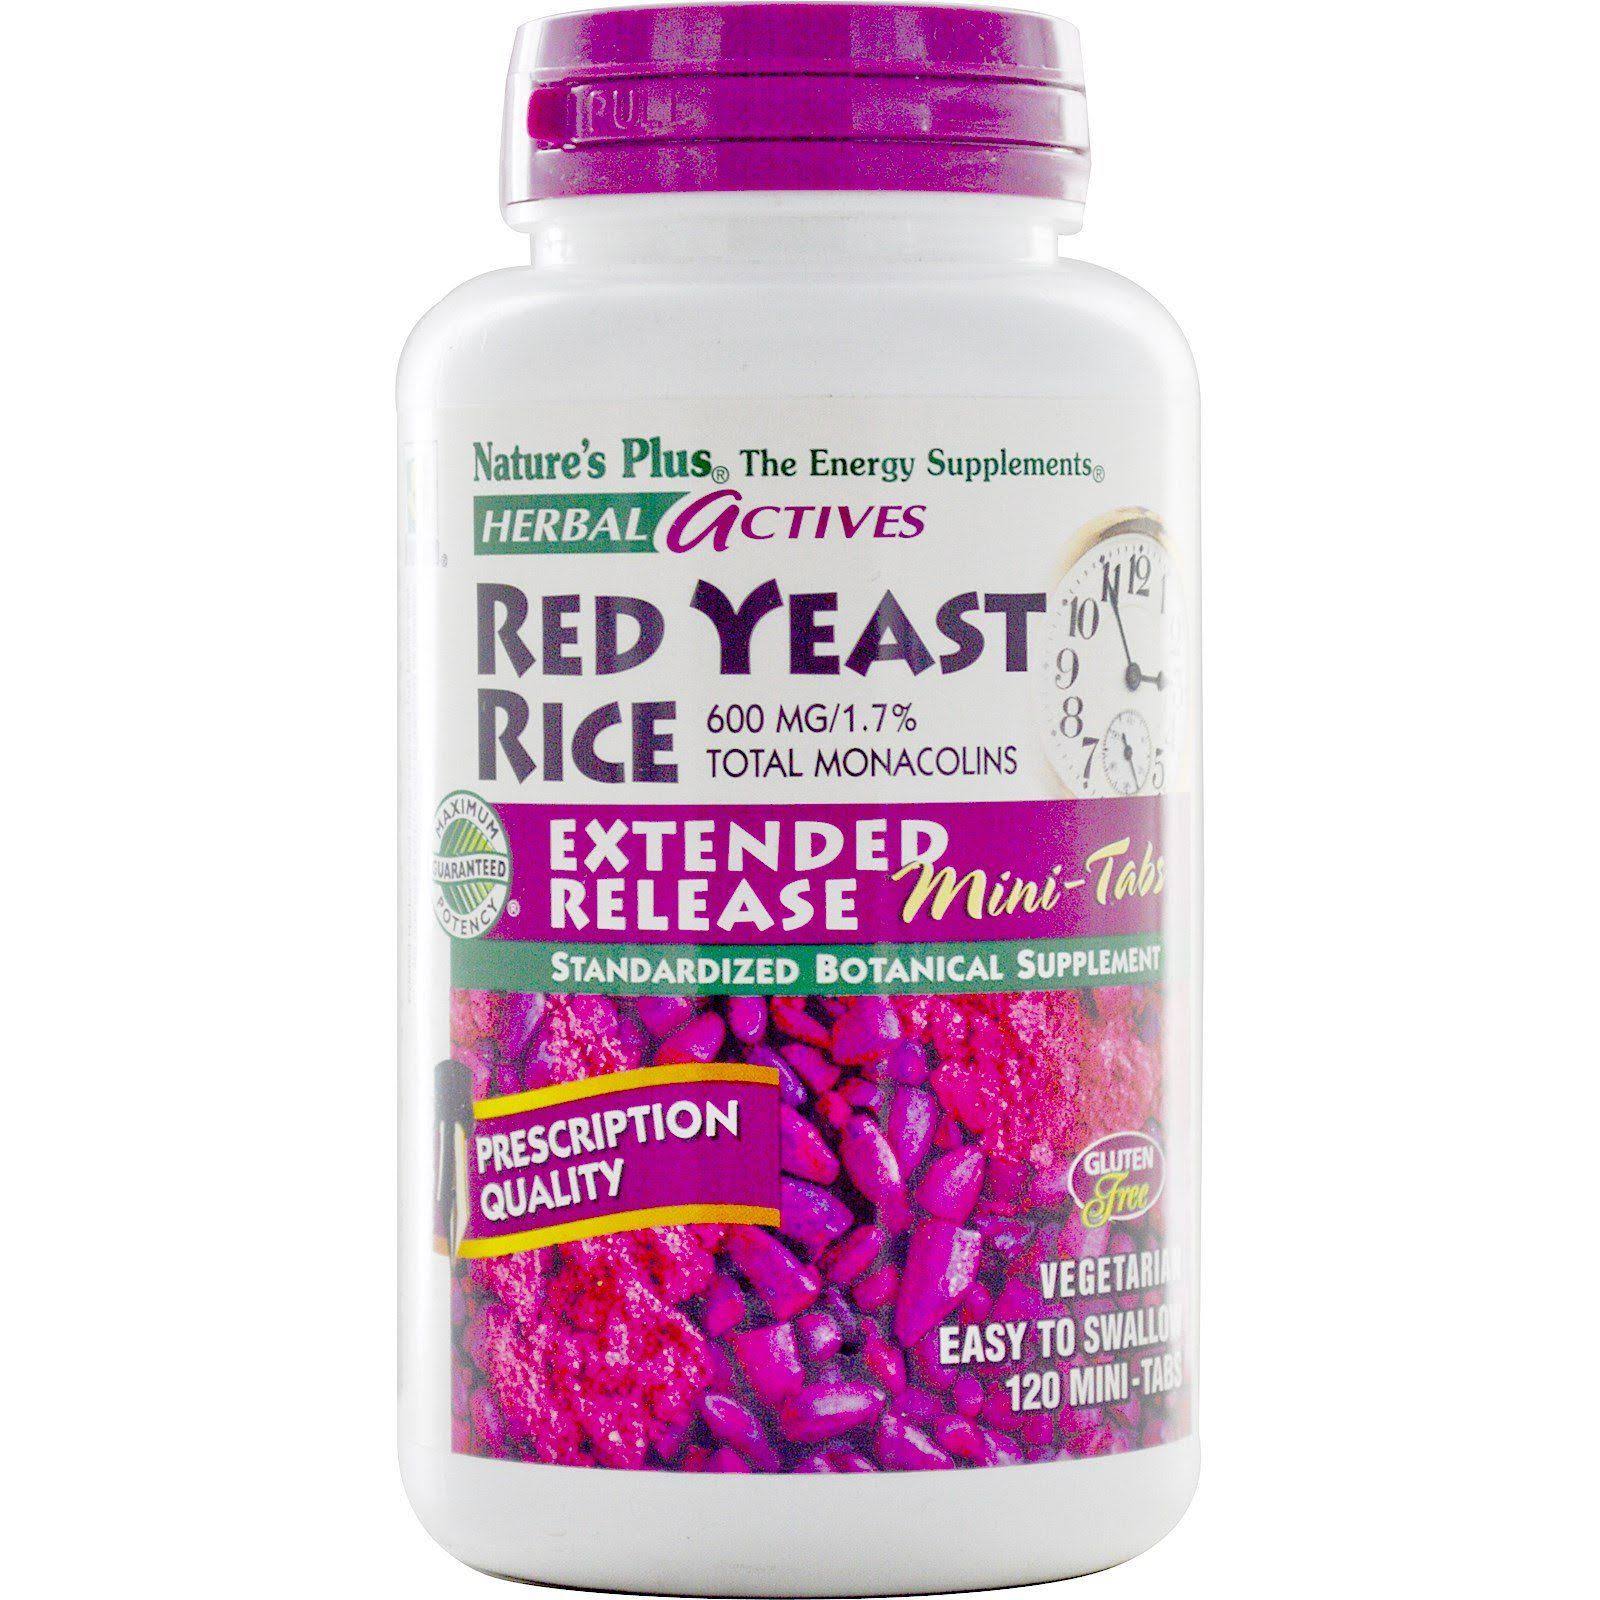 Nature's Plus - Herbal Actives Red Yeast Rice Dietary Supplement - 600mg, 120ct